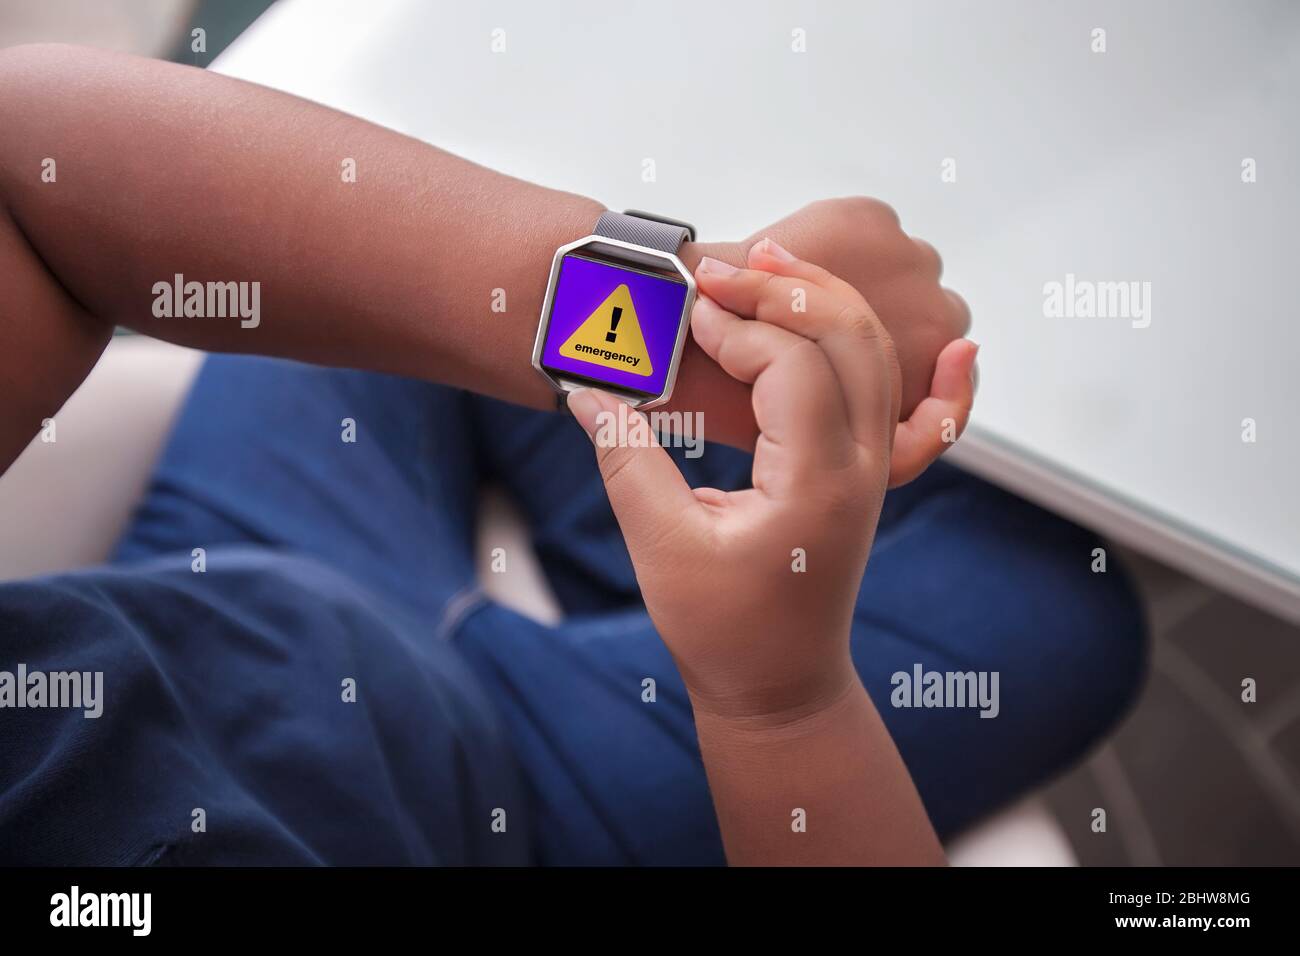 An emergency alert message being received on a wireless smart wristwatch while sitting in front of a desk. Stock Photo